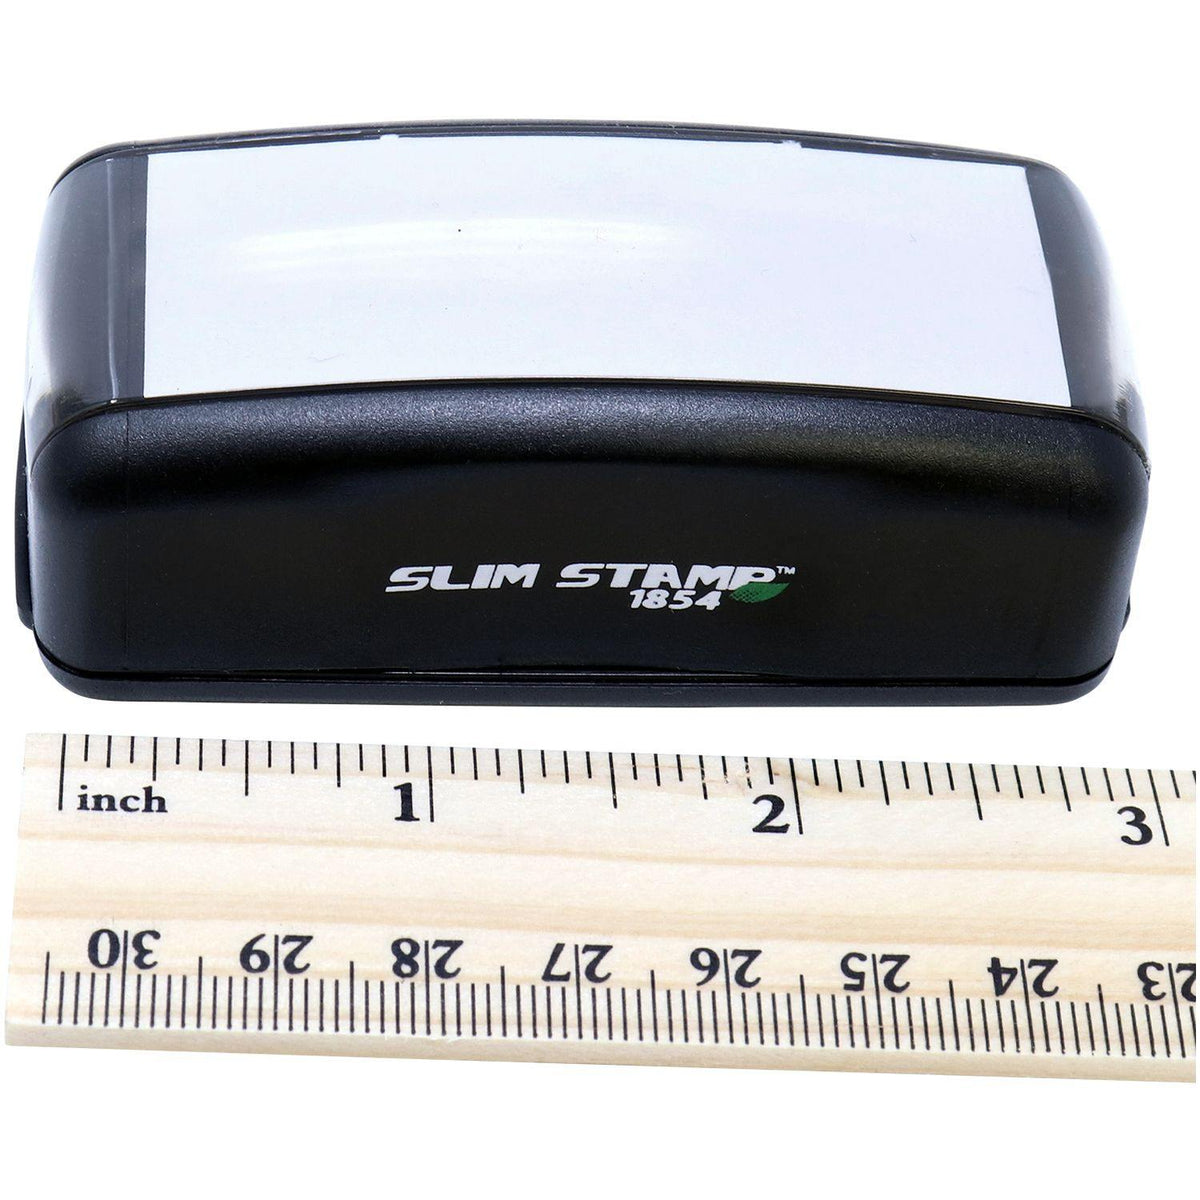 Measurement Large Pre Inked Validated Stamp with Ruler